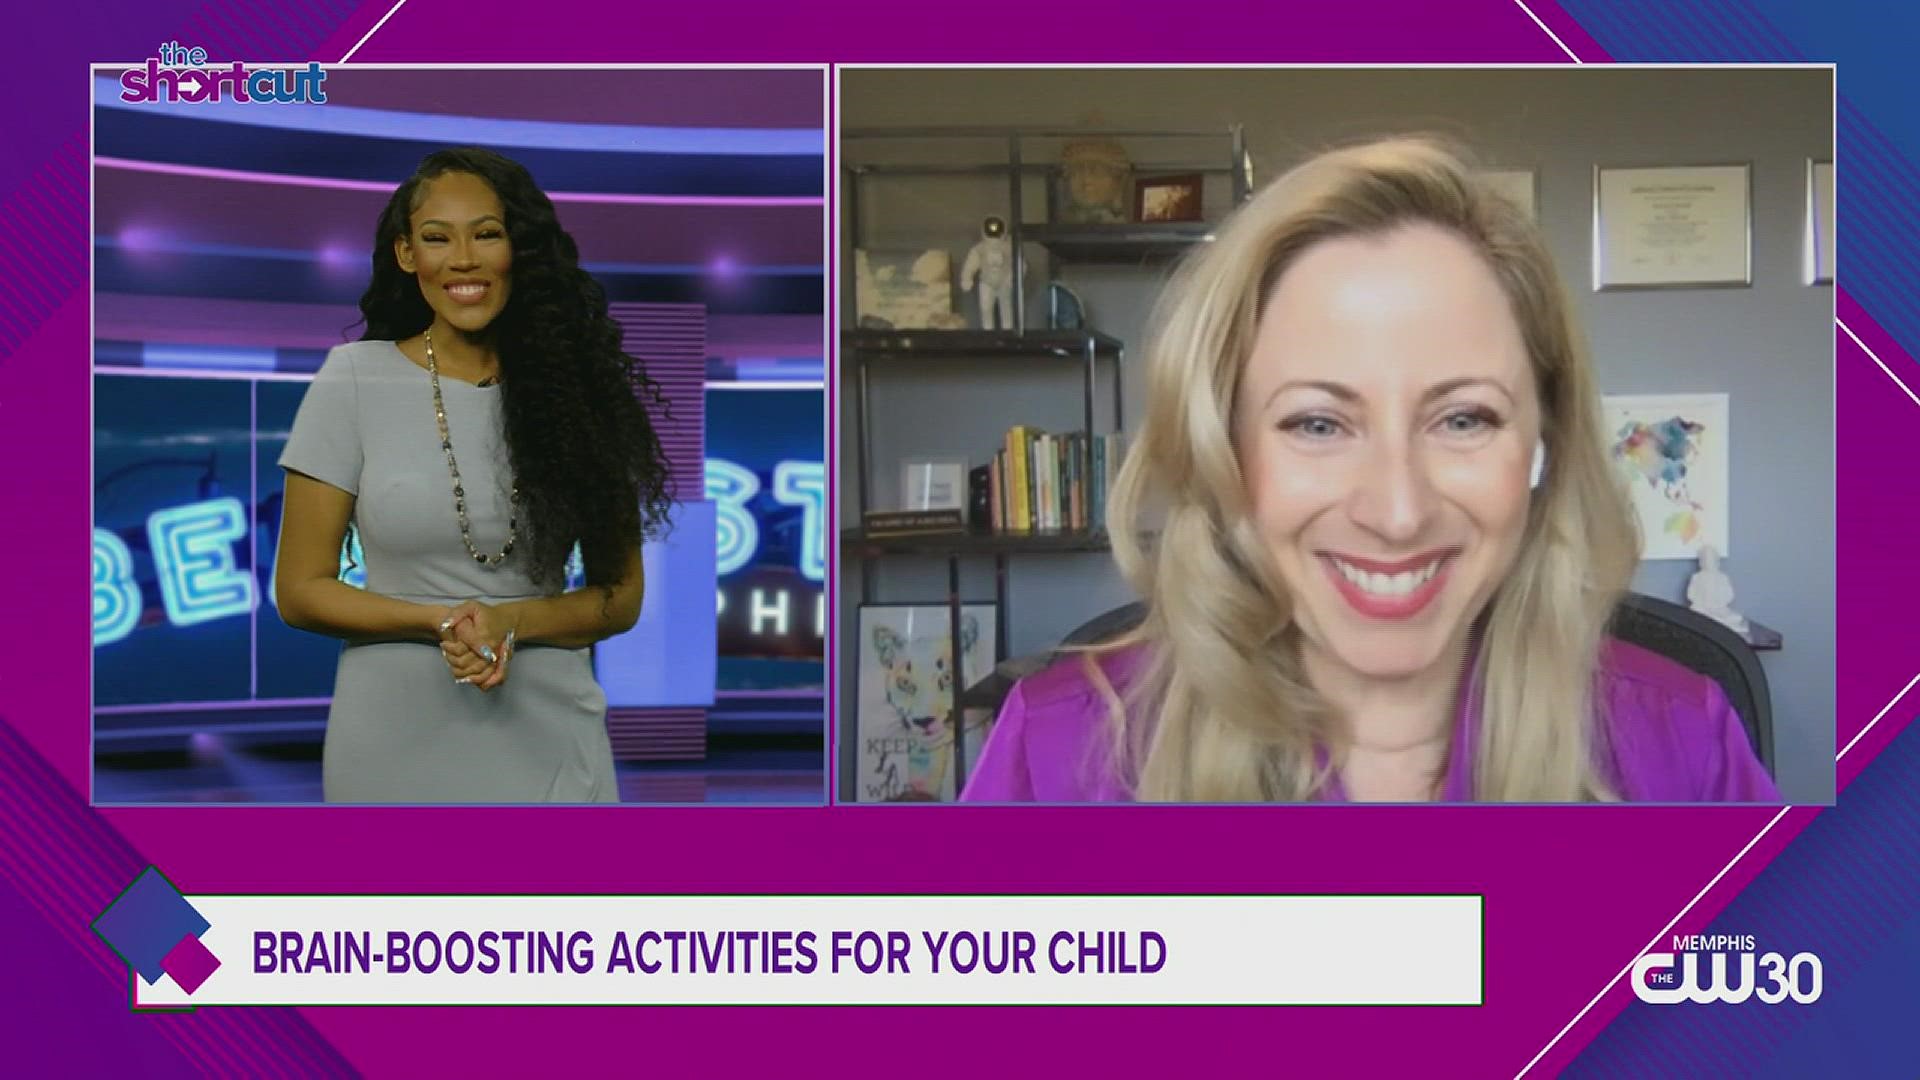 Join lifestyle host Sydney Neely and neuroscientist Dr. Nicole Tetreault as we take a closer look into some non-screen brain-boosting activities for children!